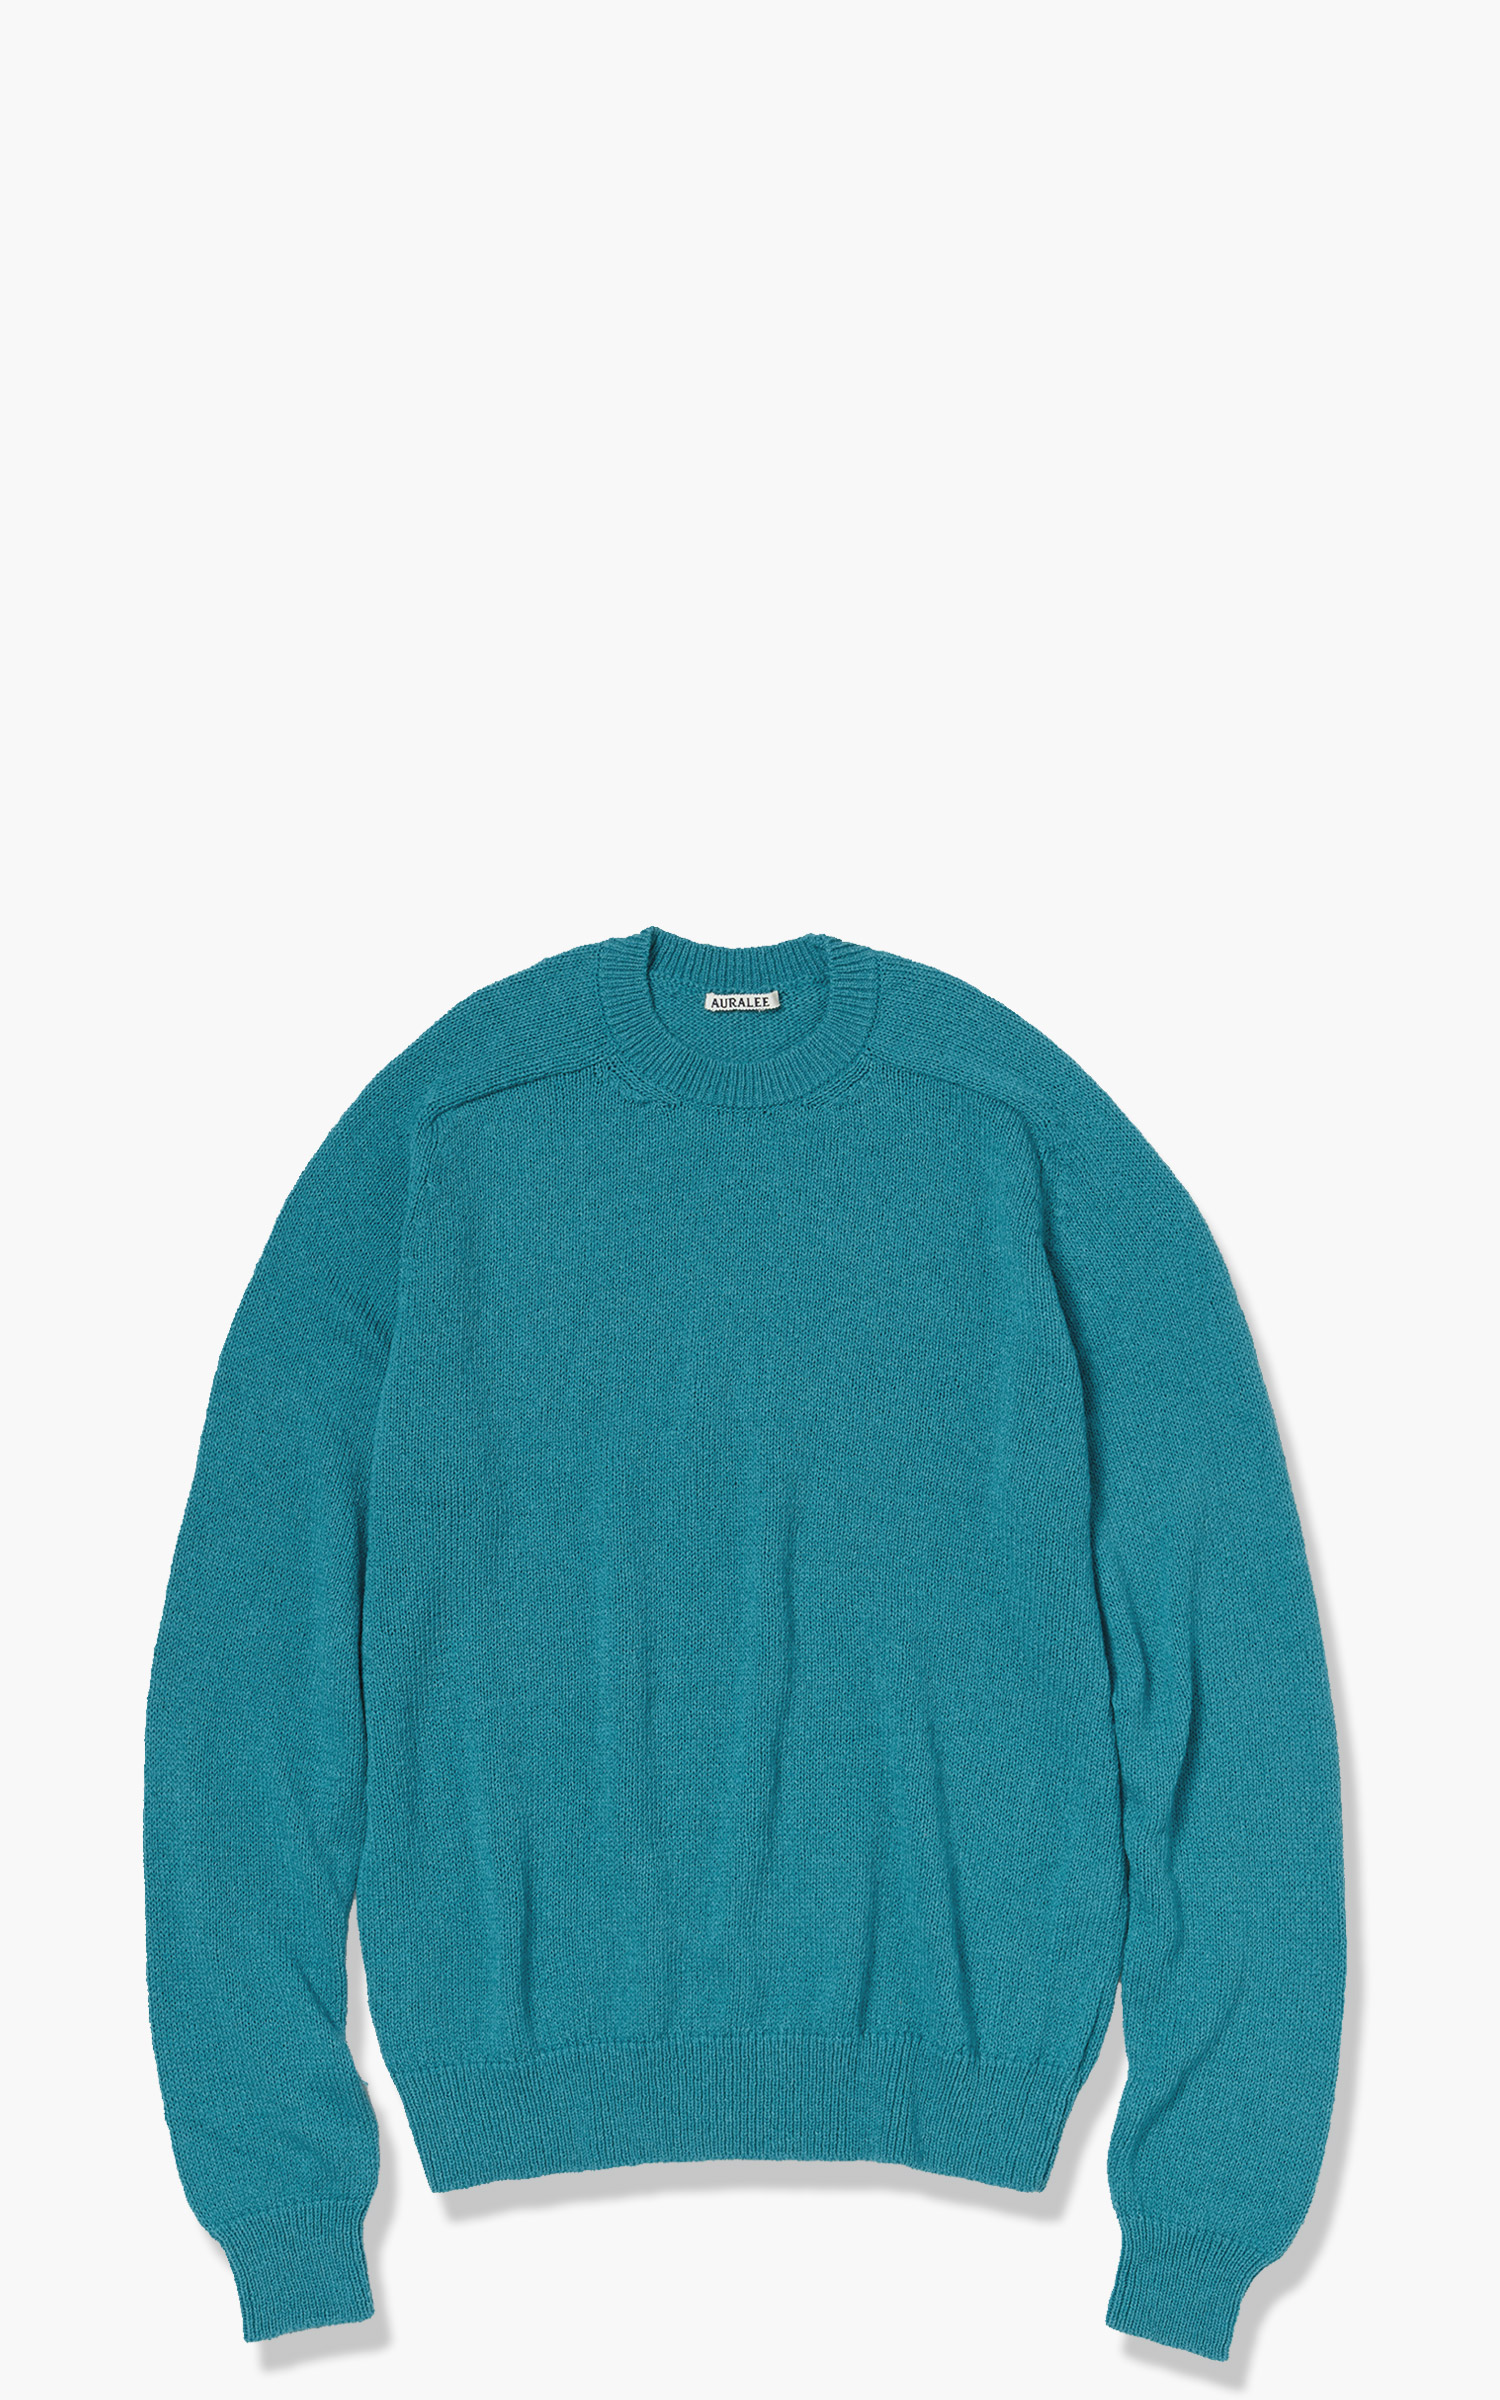 Auralee Super Airy Wool Knit P/O Turquoise Blue | Cultizm